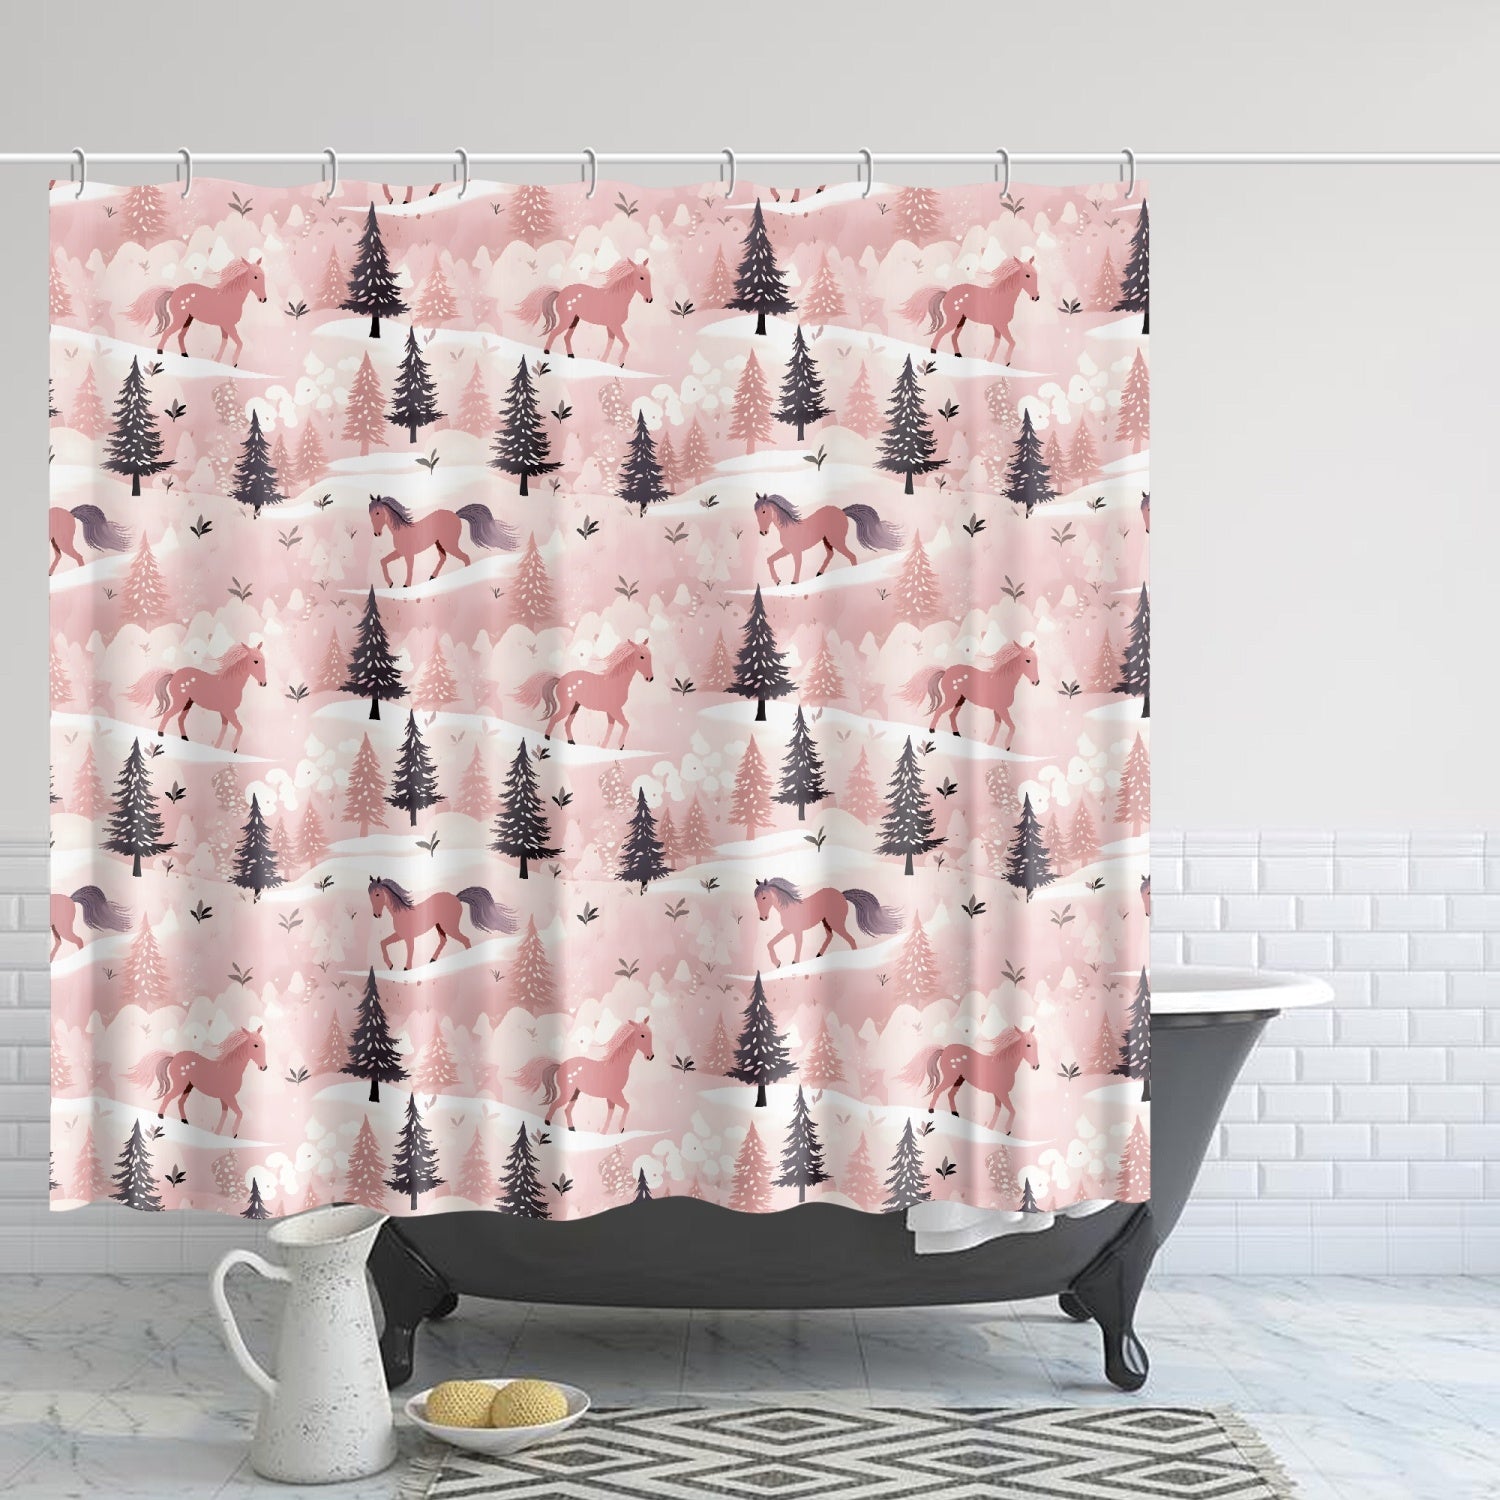 Shower Curtain - Pink Pony